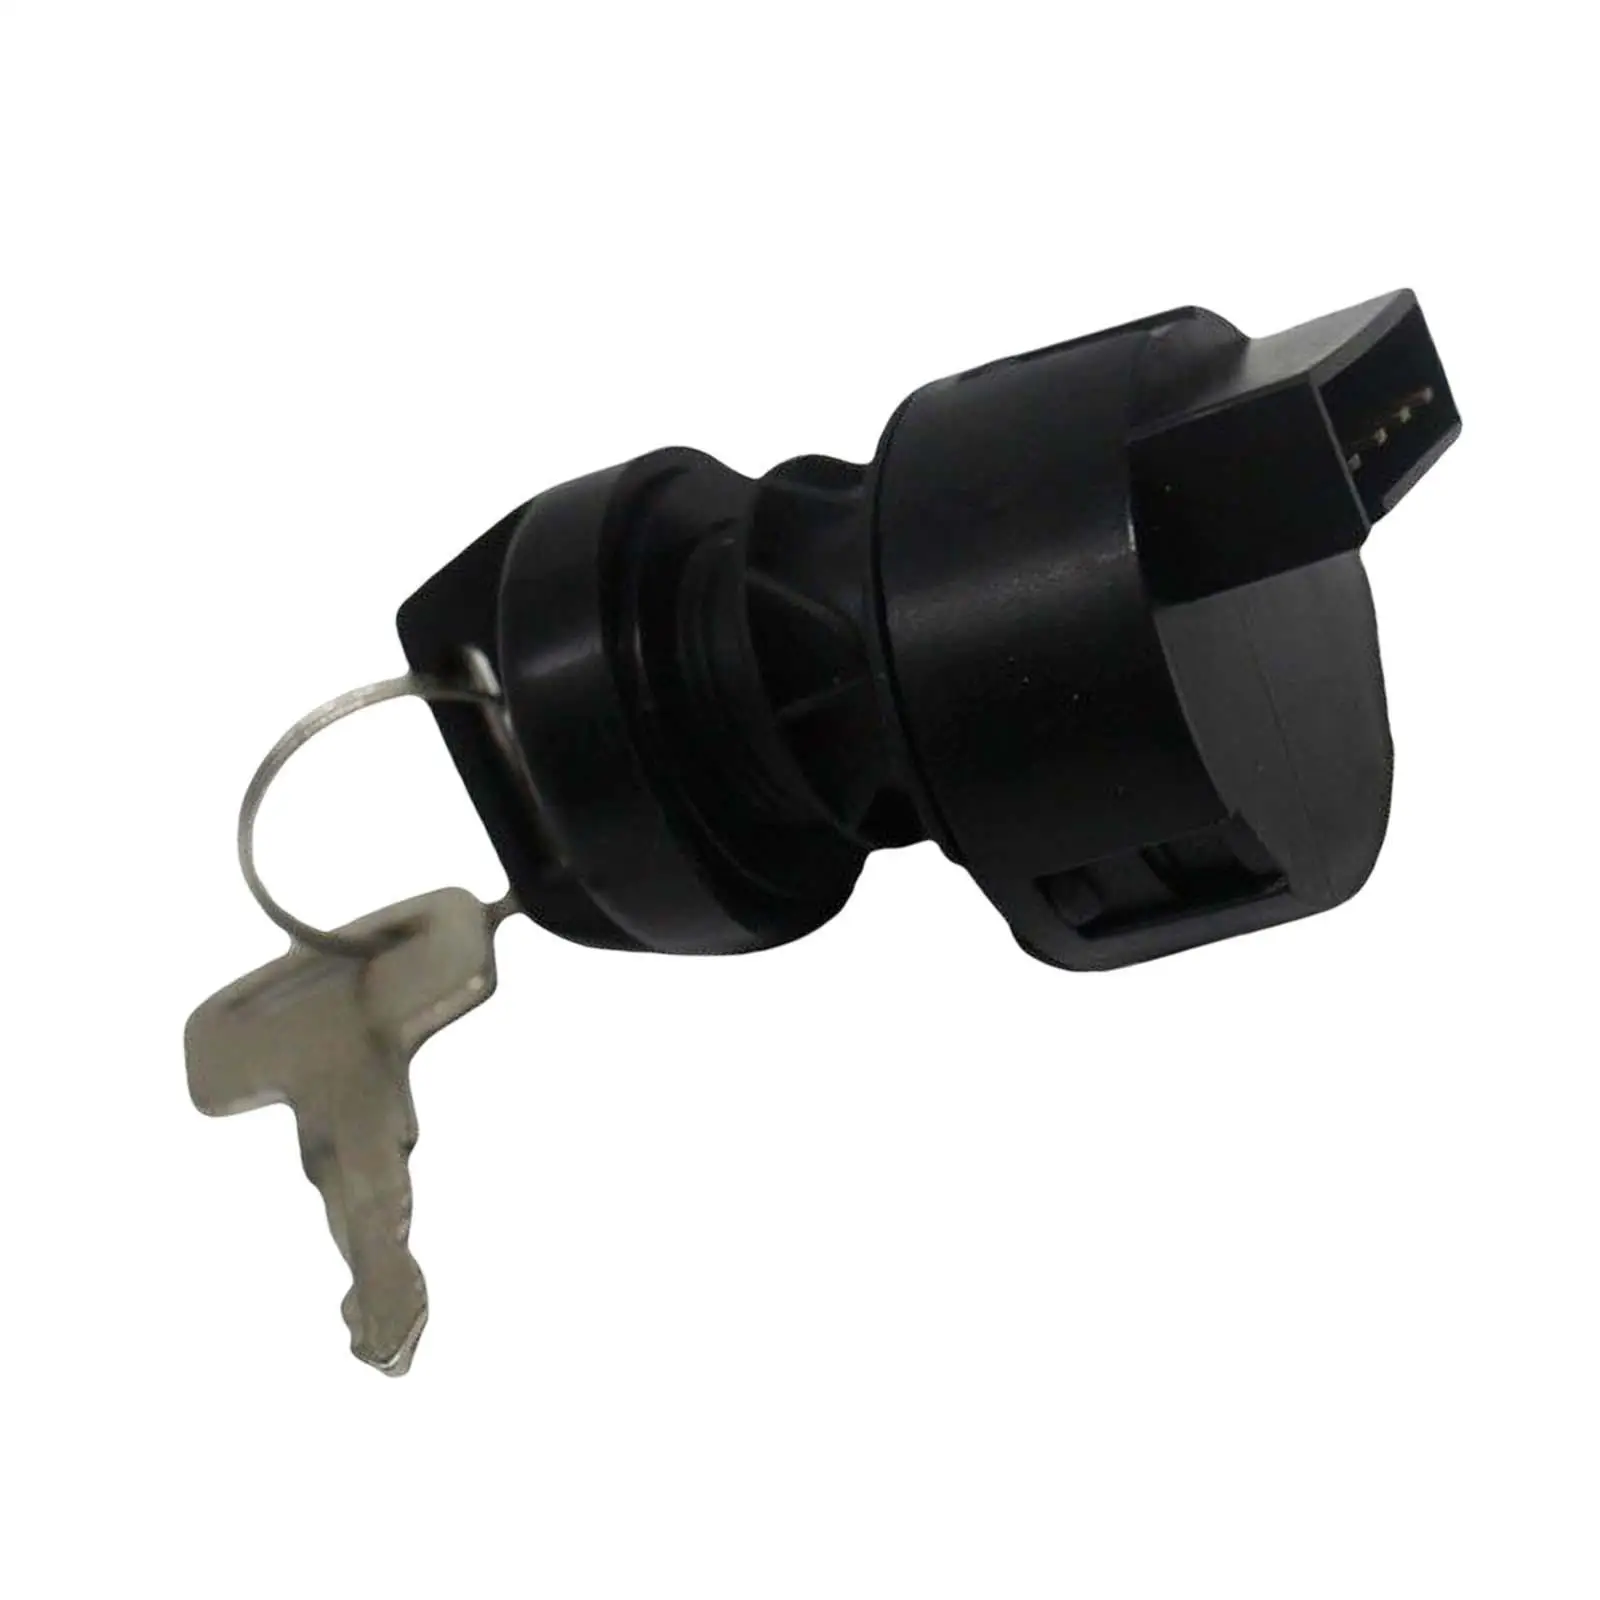 Ignition Switch Lock Durable Professional for Polaris Sportsman 335 400 500 600